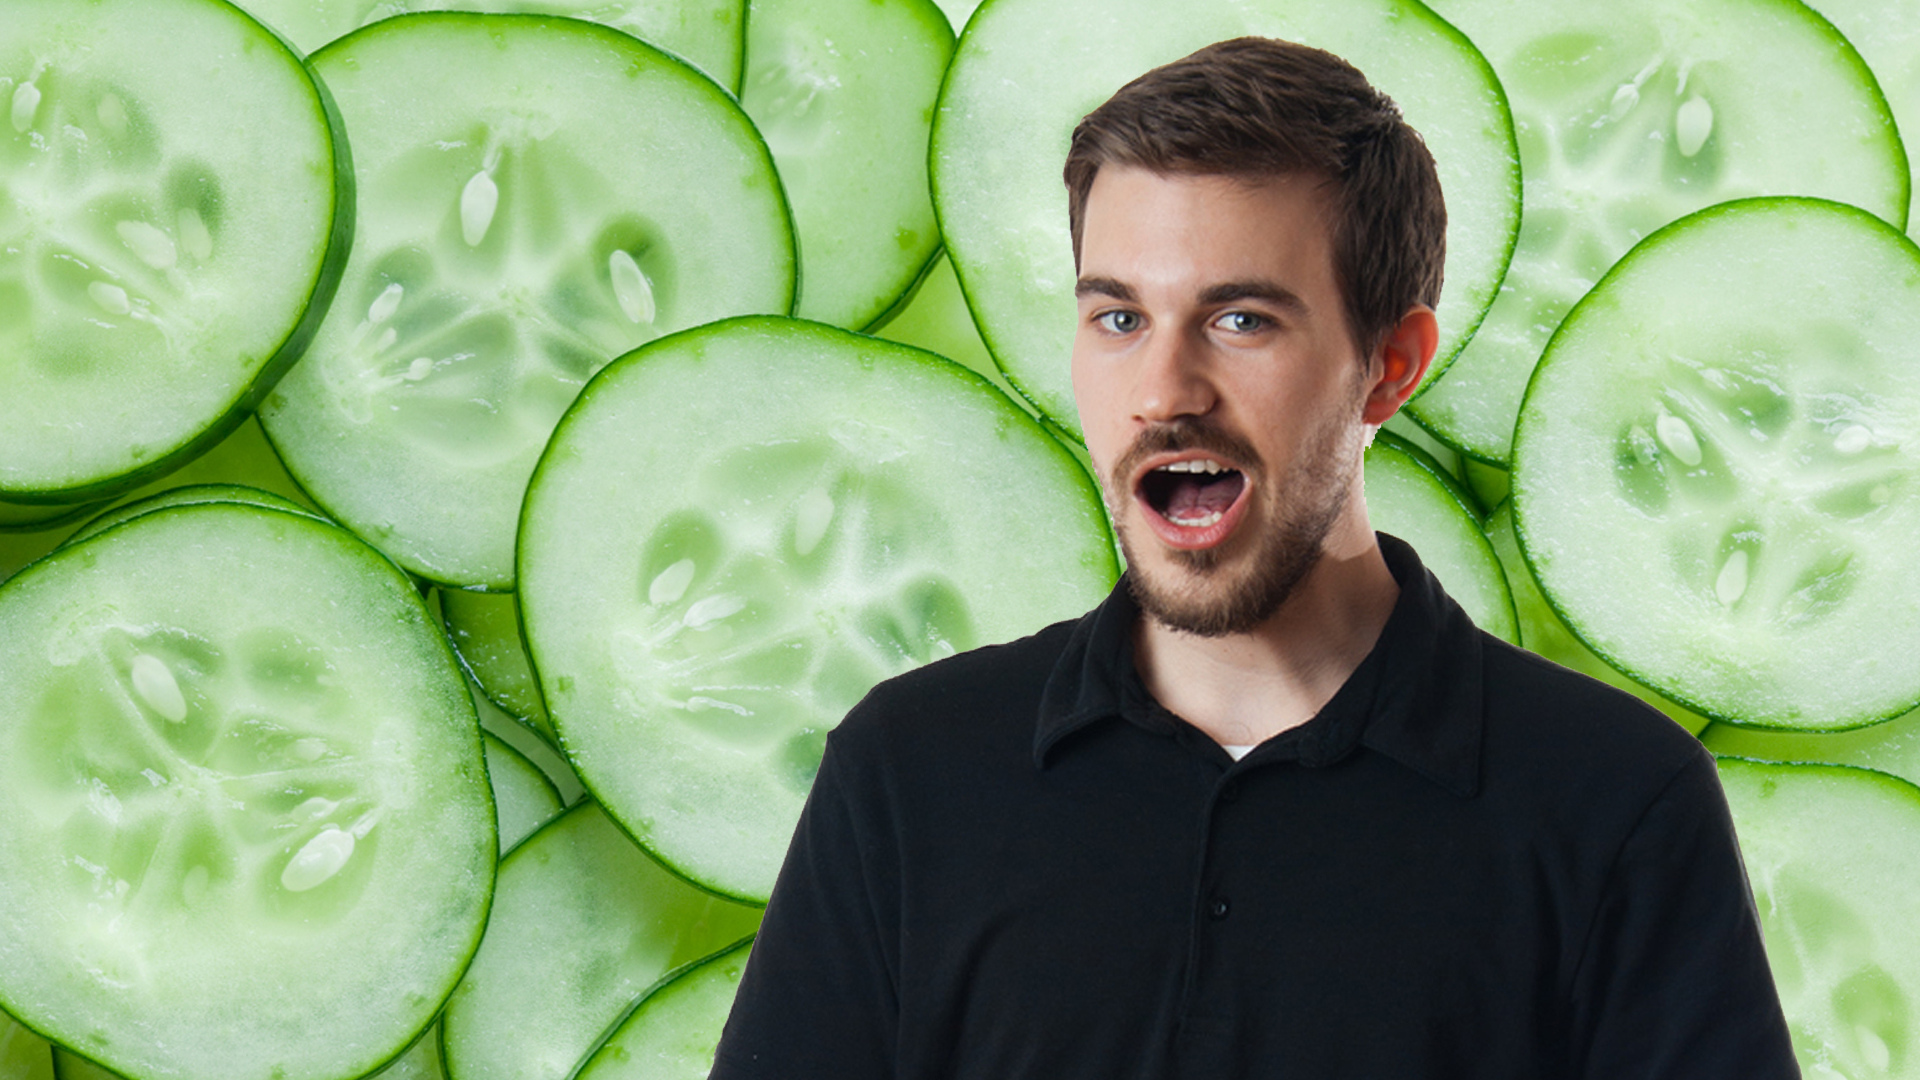 A man burping after eating a lot of cucumbers